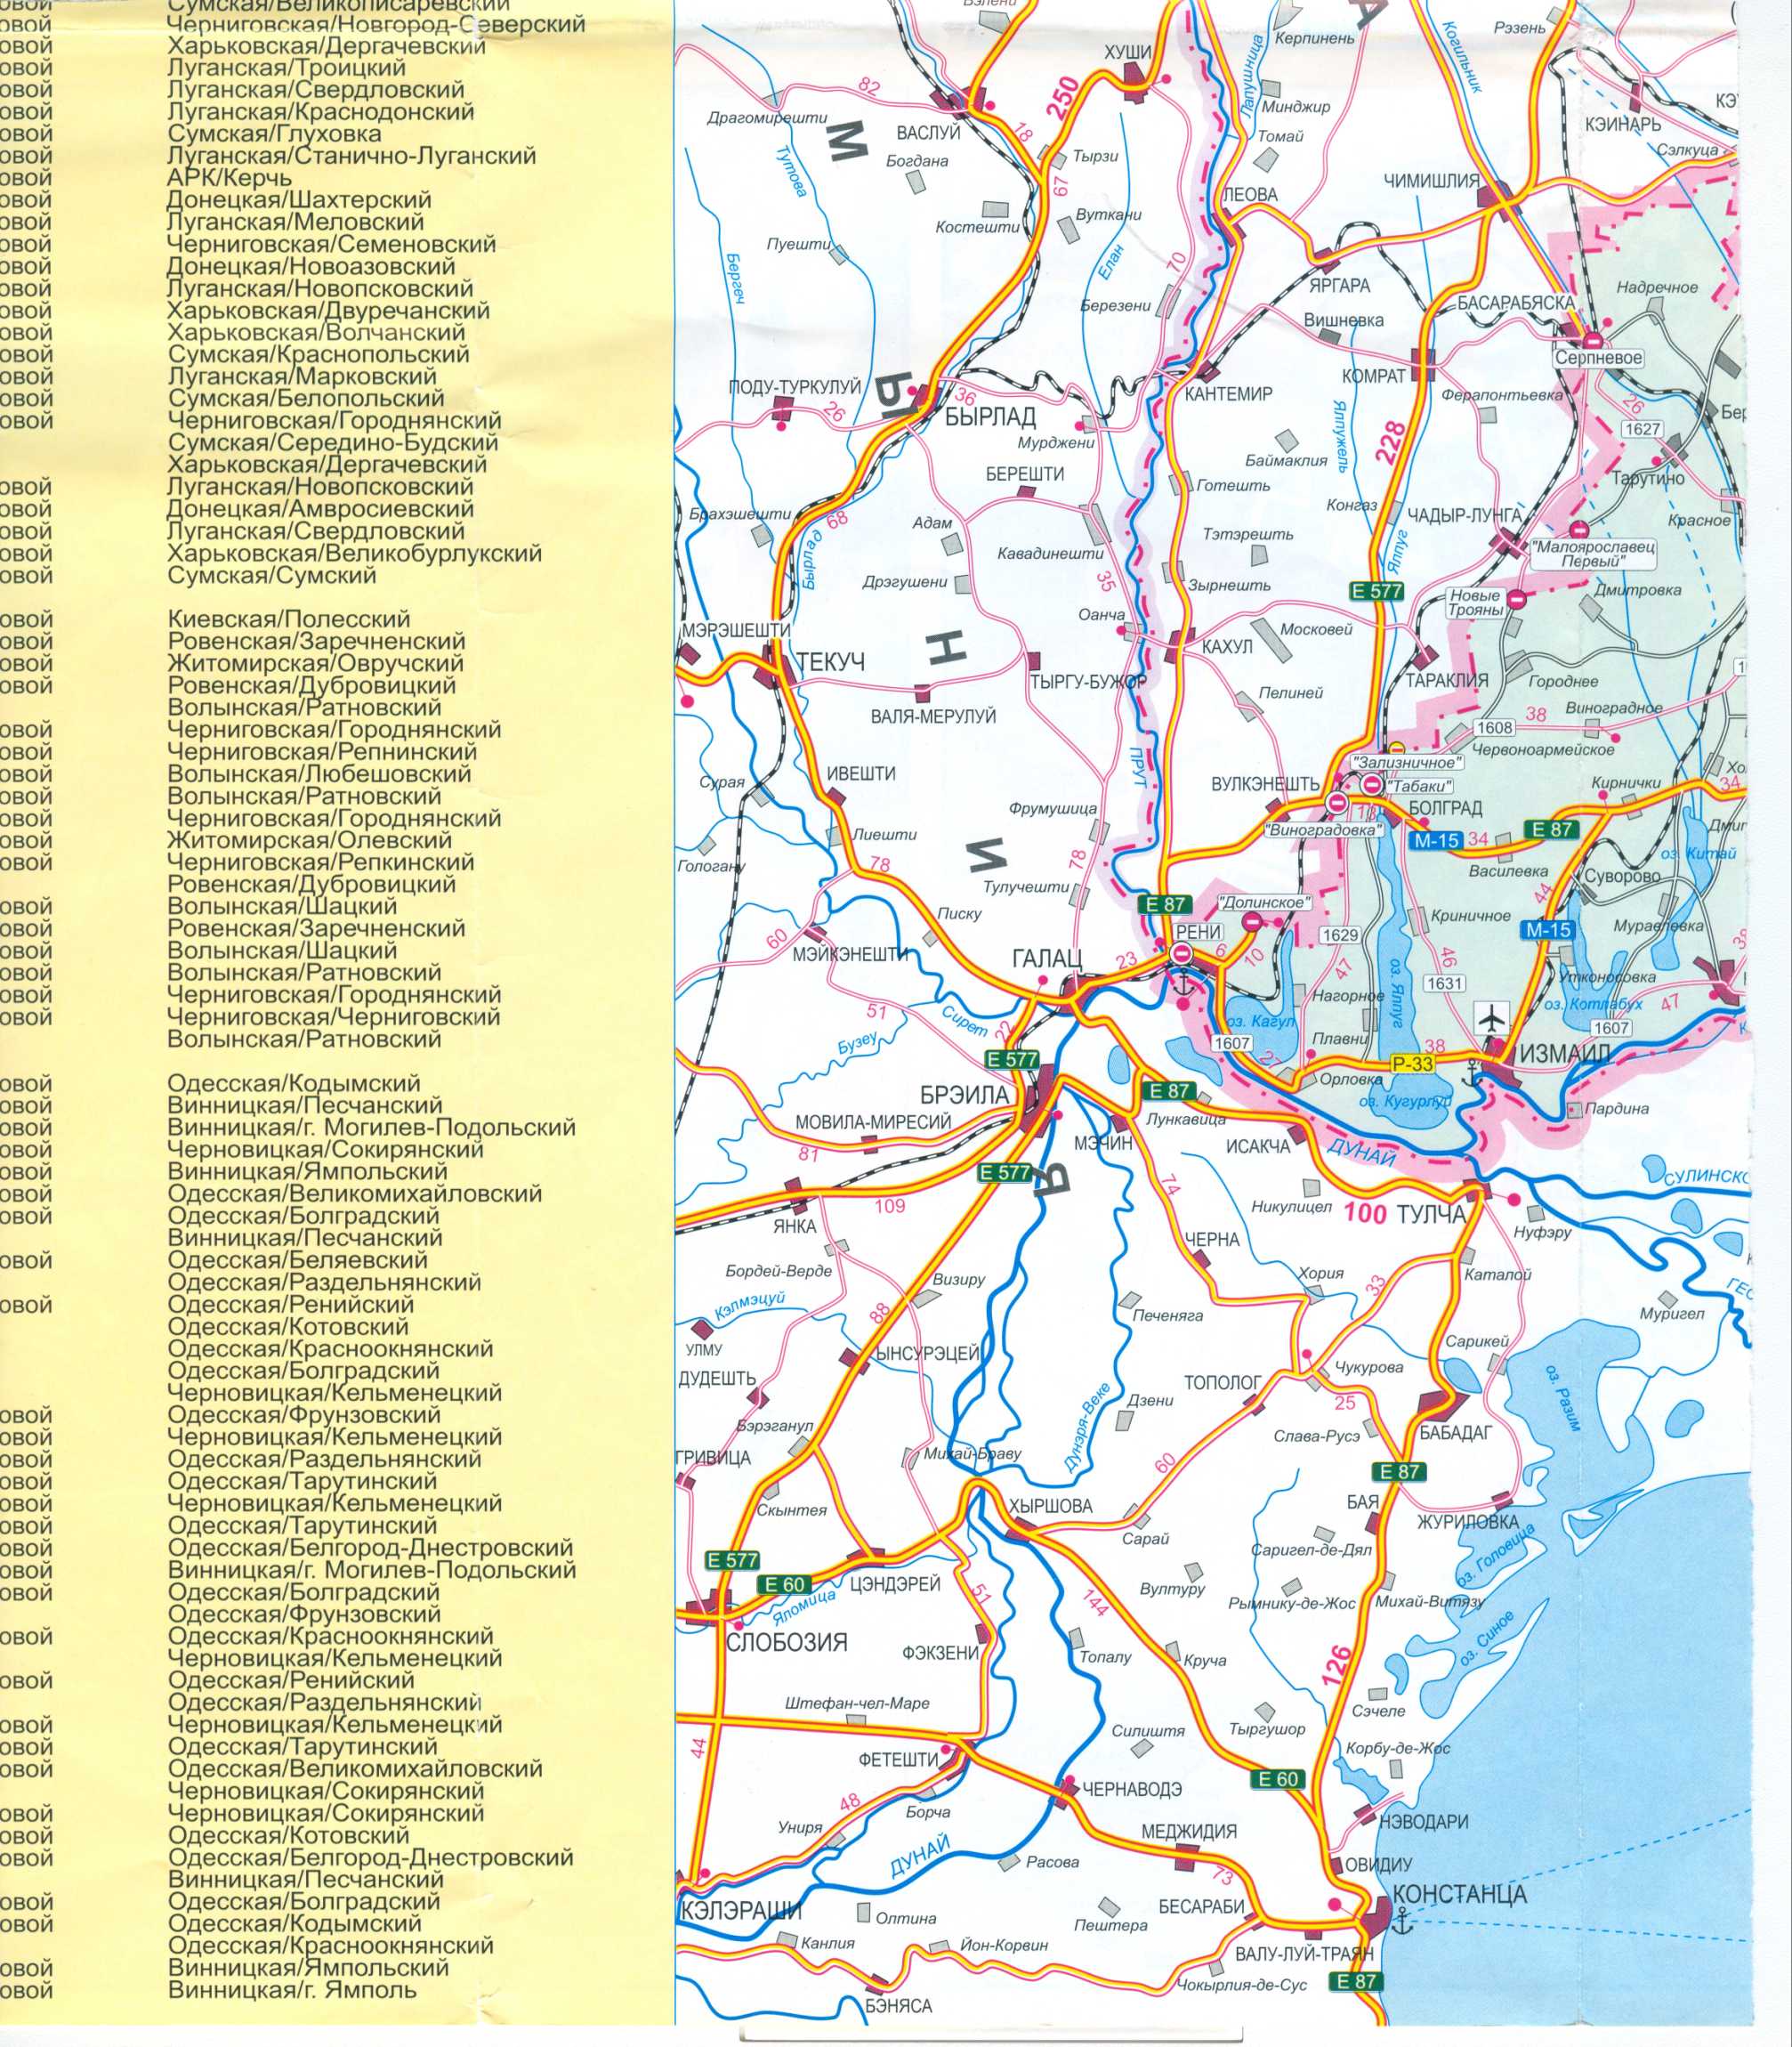 The map of Ukraine is free of charge. Map of roads of Ukraine free download. Big map of Ukraine's roads for free, B2